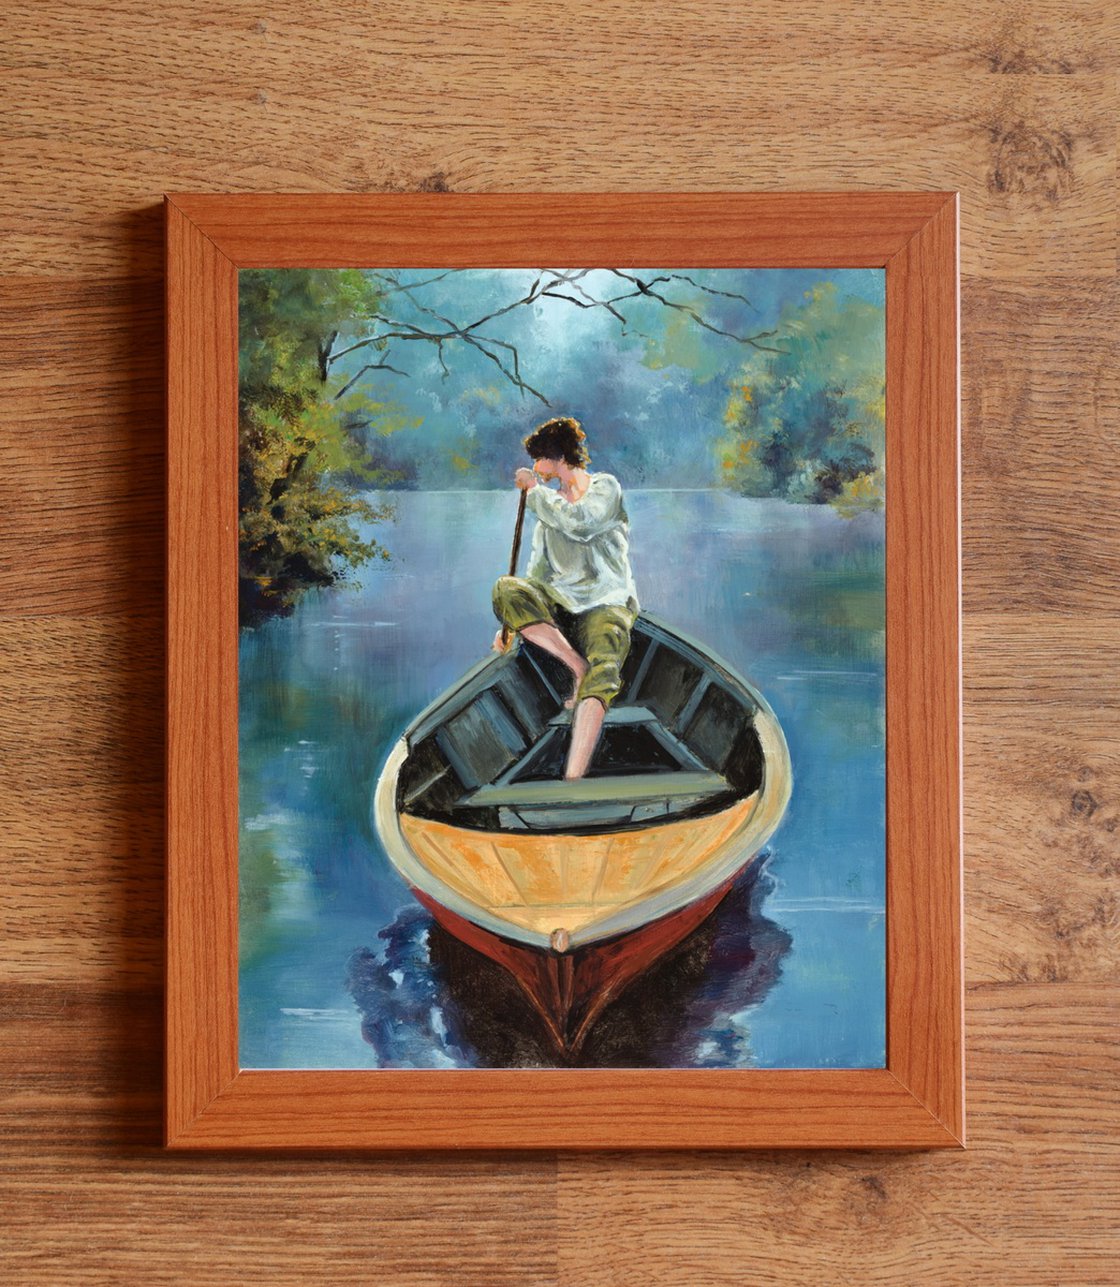 MAGDA BOY FISHING IN PARIS ORIGINAL OIL ON CANVAS LANDSCAPE PAINTING